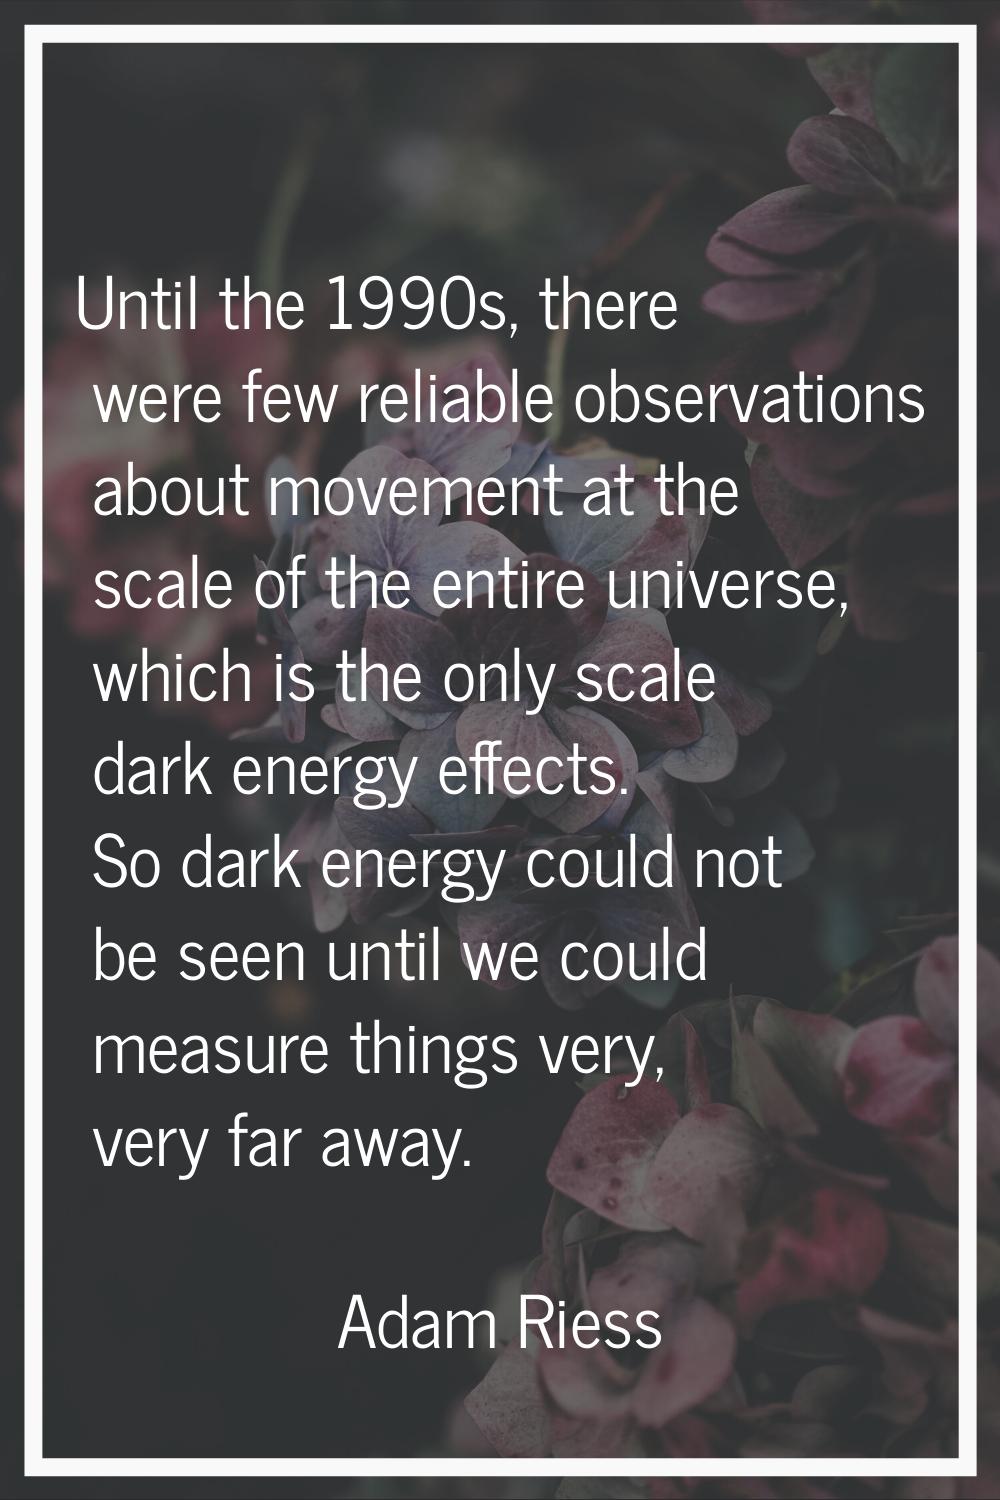 Until the 1990s, there were few reliable observations about movement at the scale of the entire uni